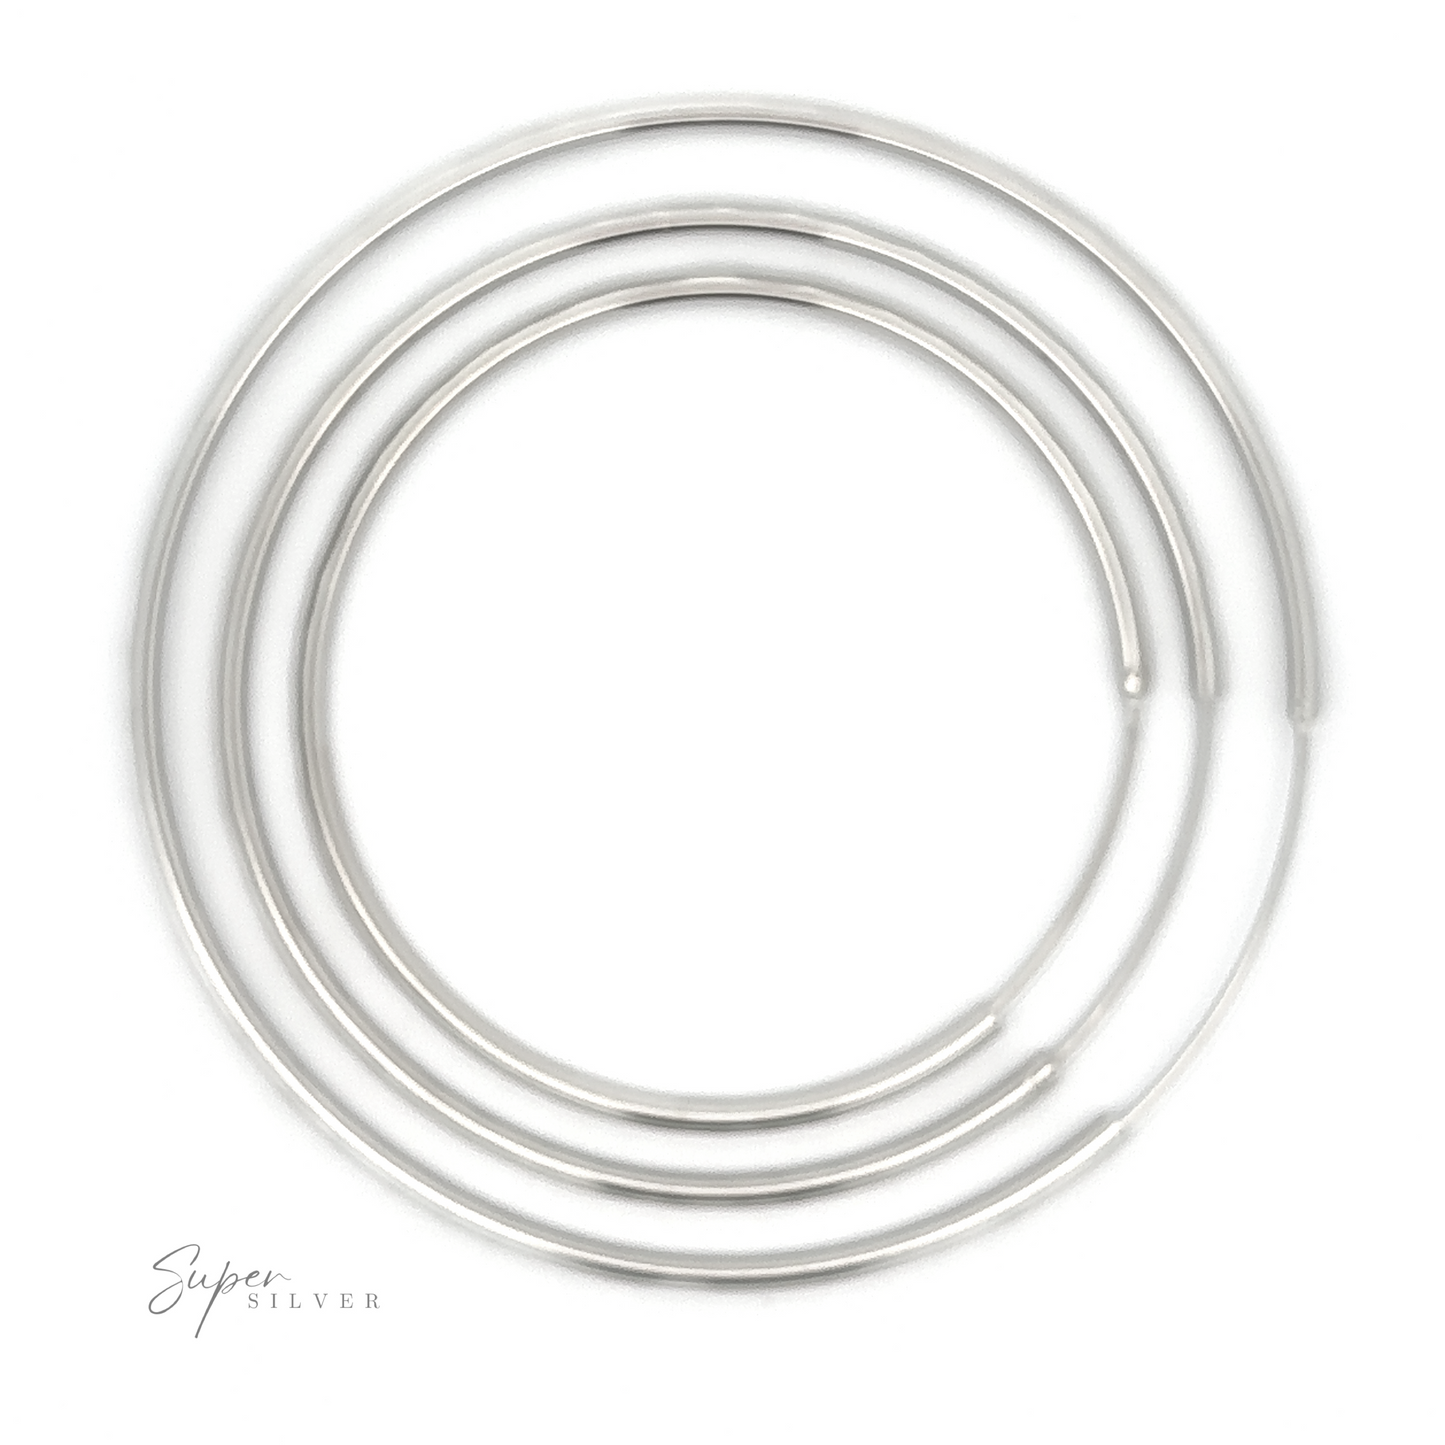 Animated image of three concentric circles made of 2mm Diamond Cut Hoop Earrings gently rotating and looping, with a signature "silver" at the bottom right corner.